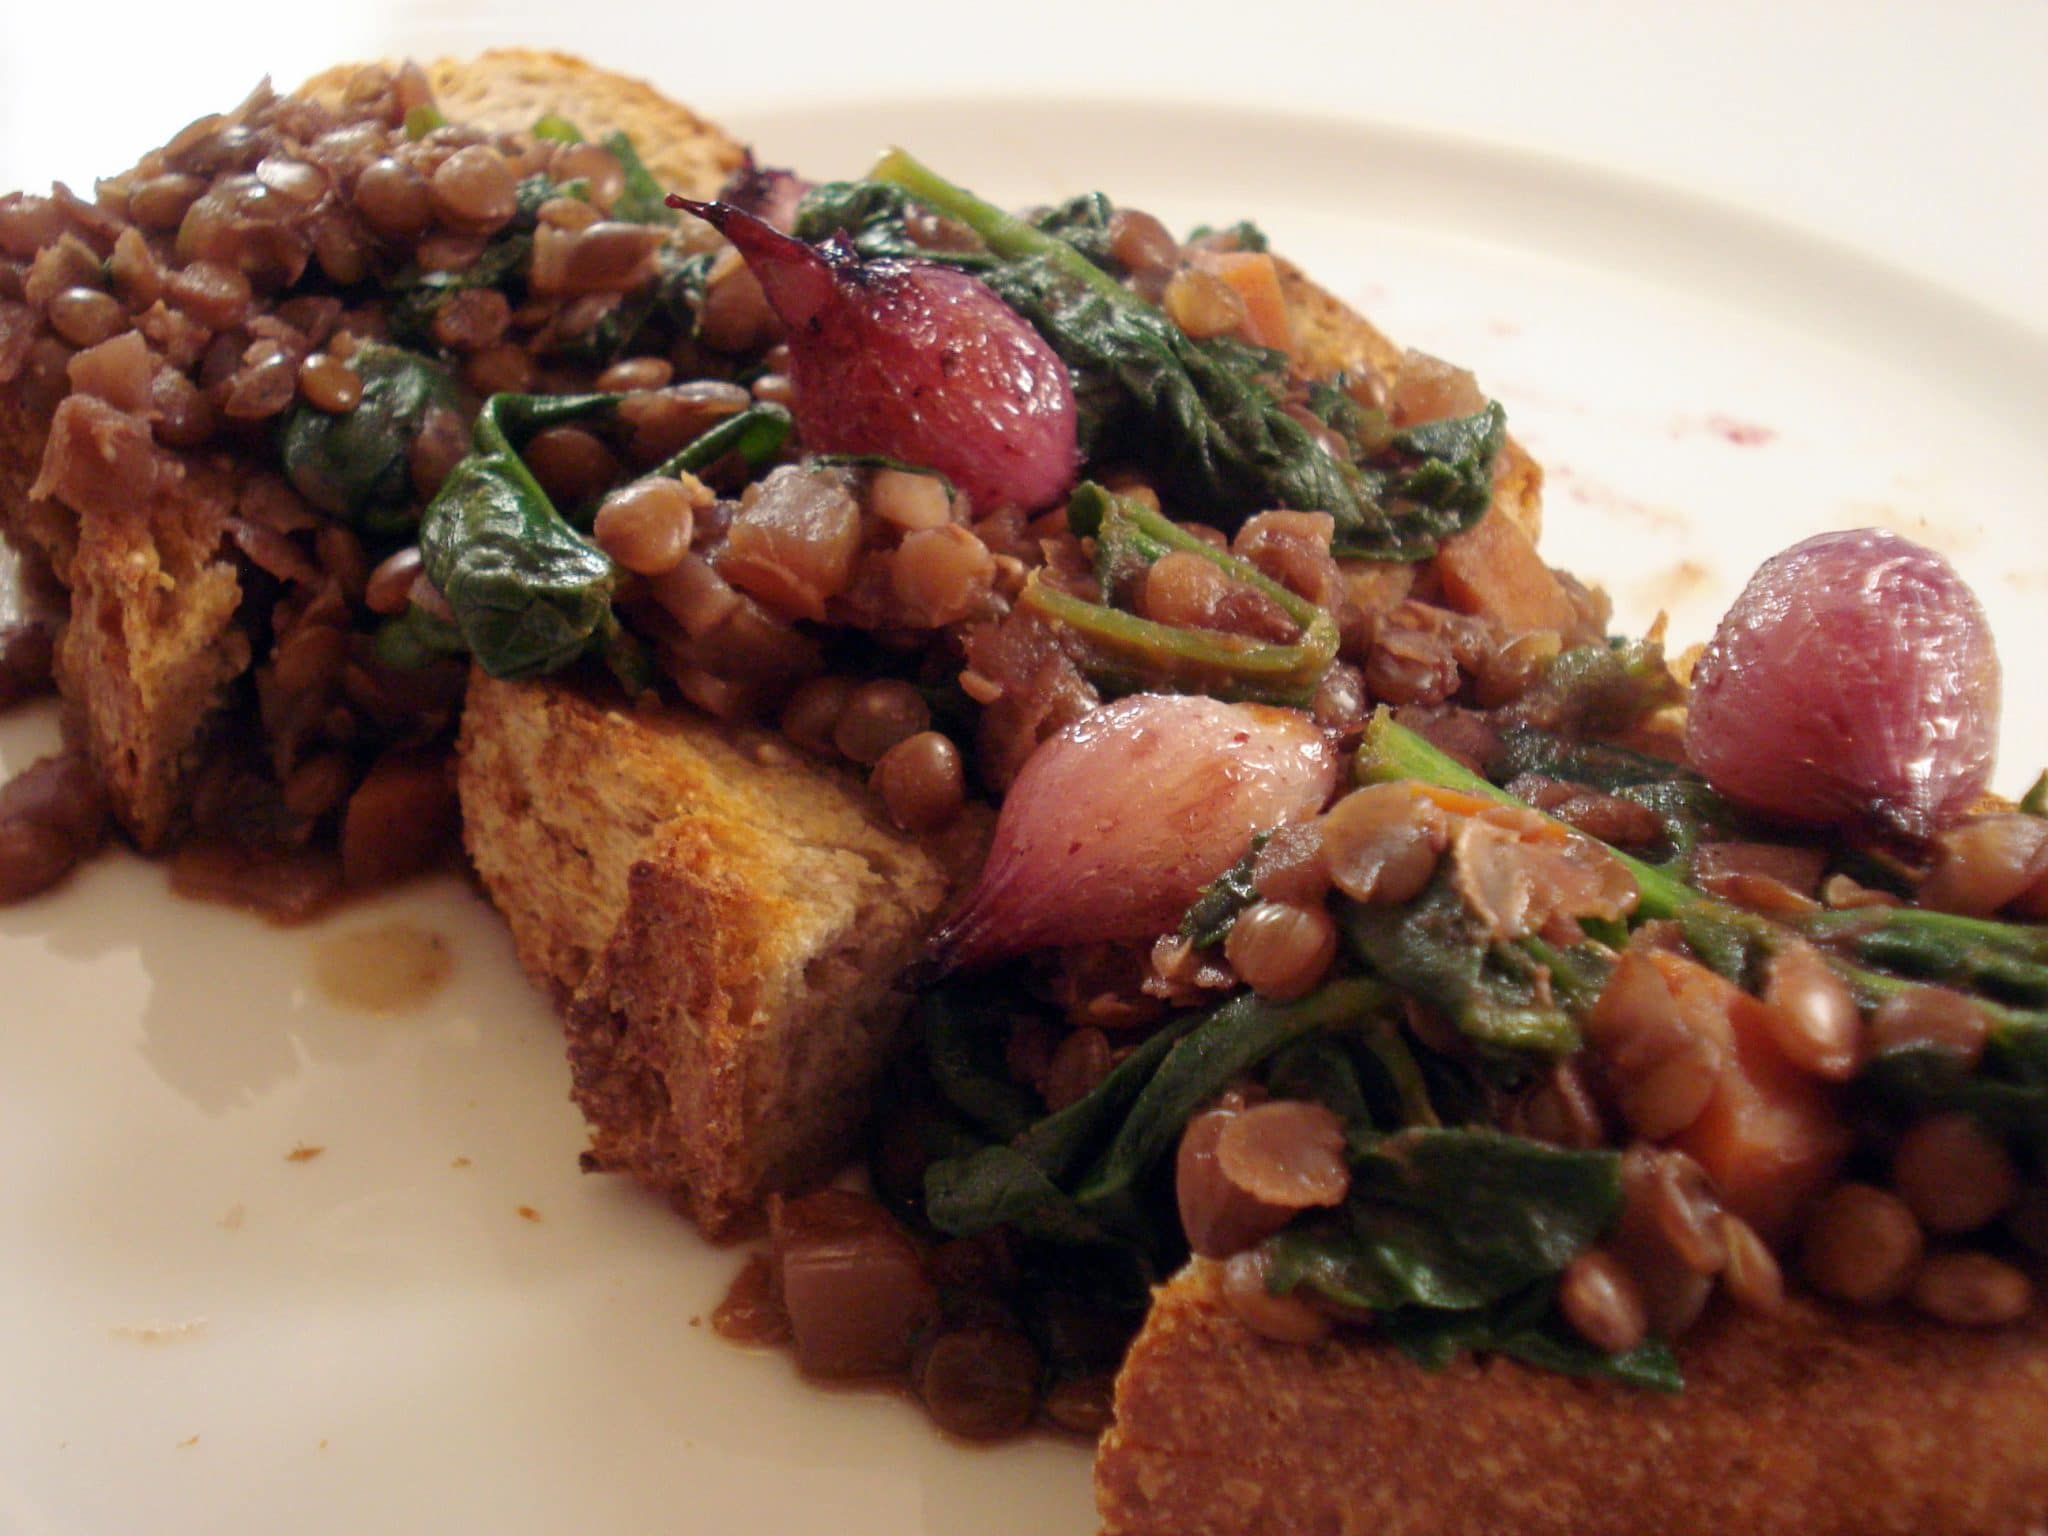 Plate of Wine Braised Lentils over toast with spinach and red pearl onions